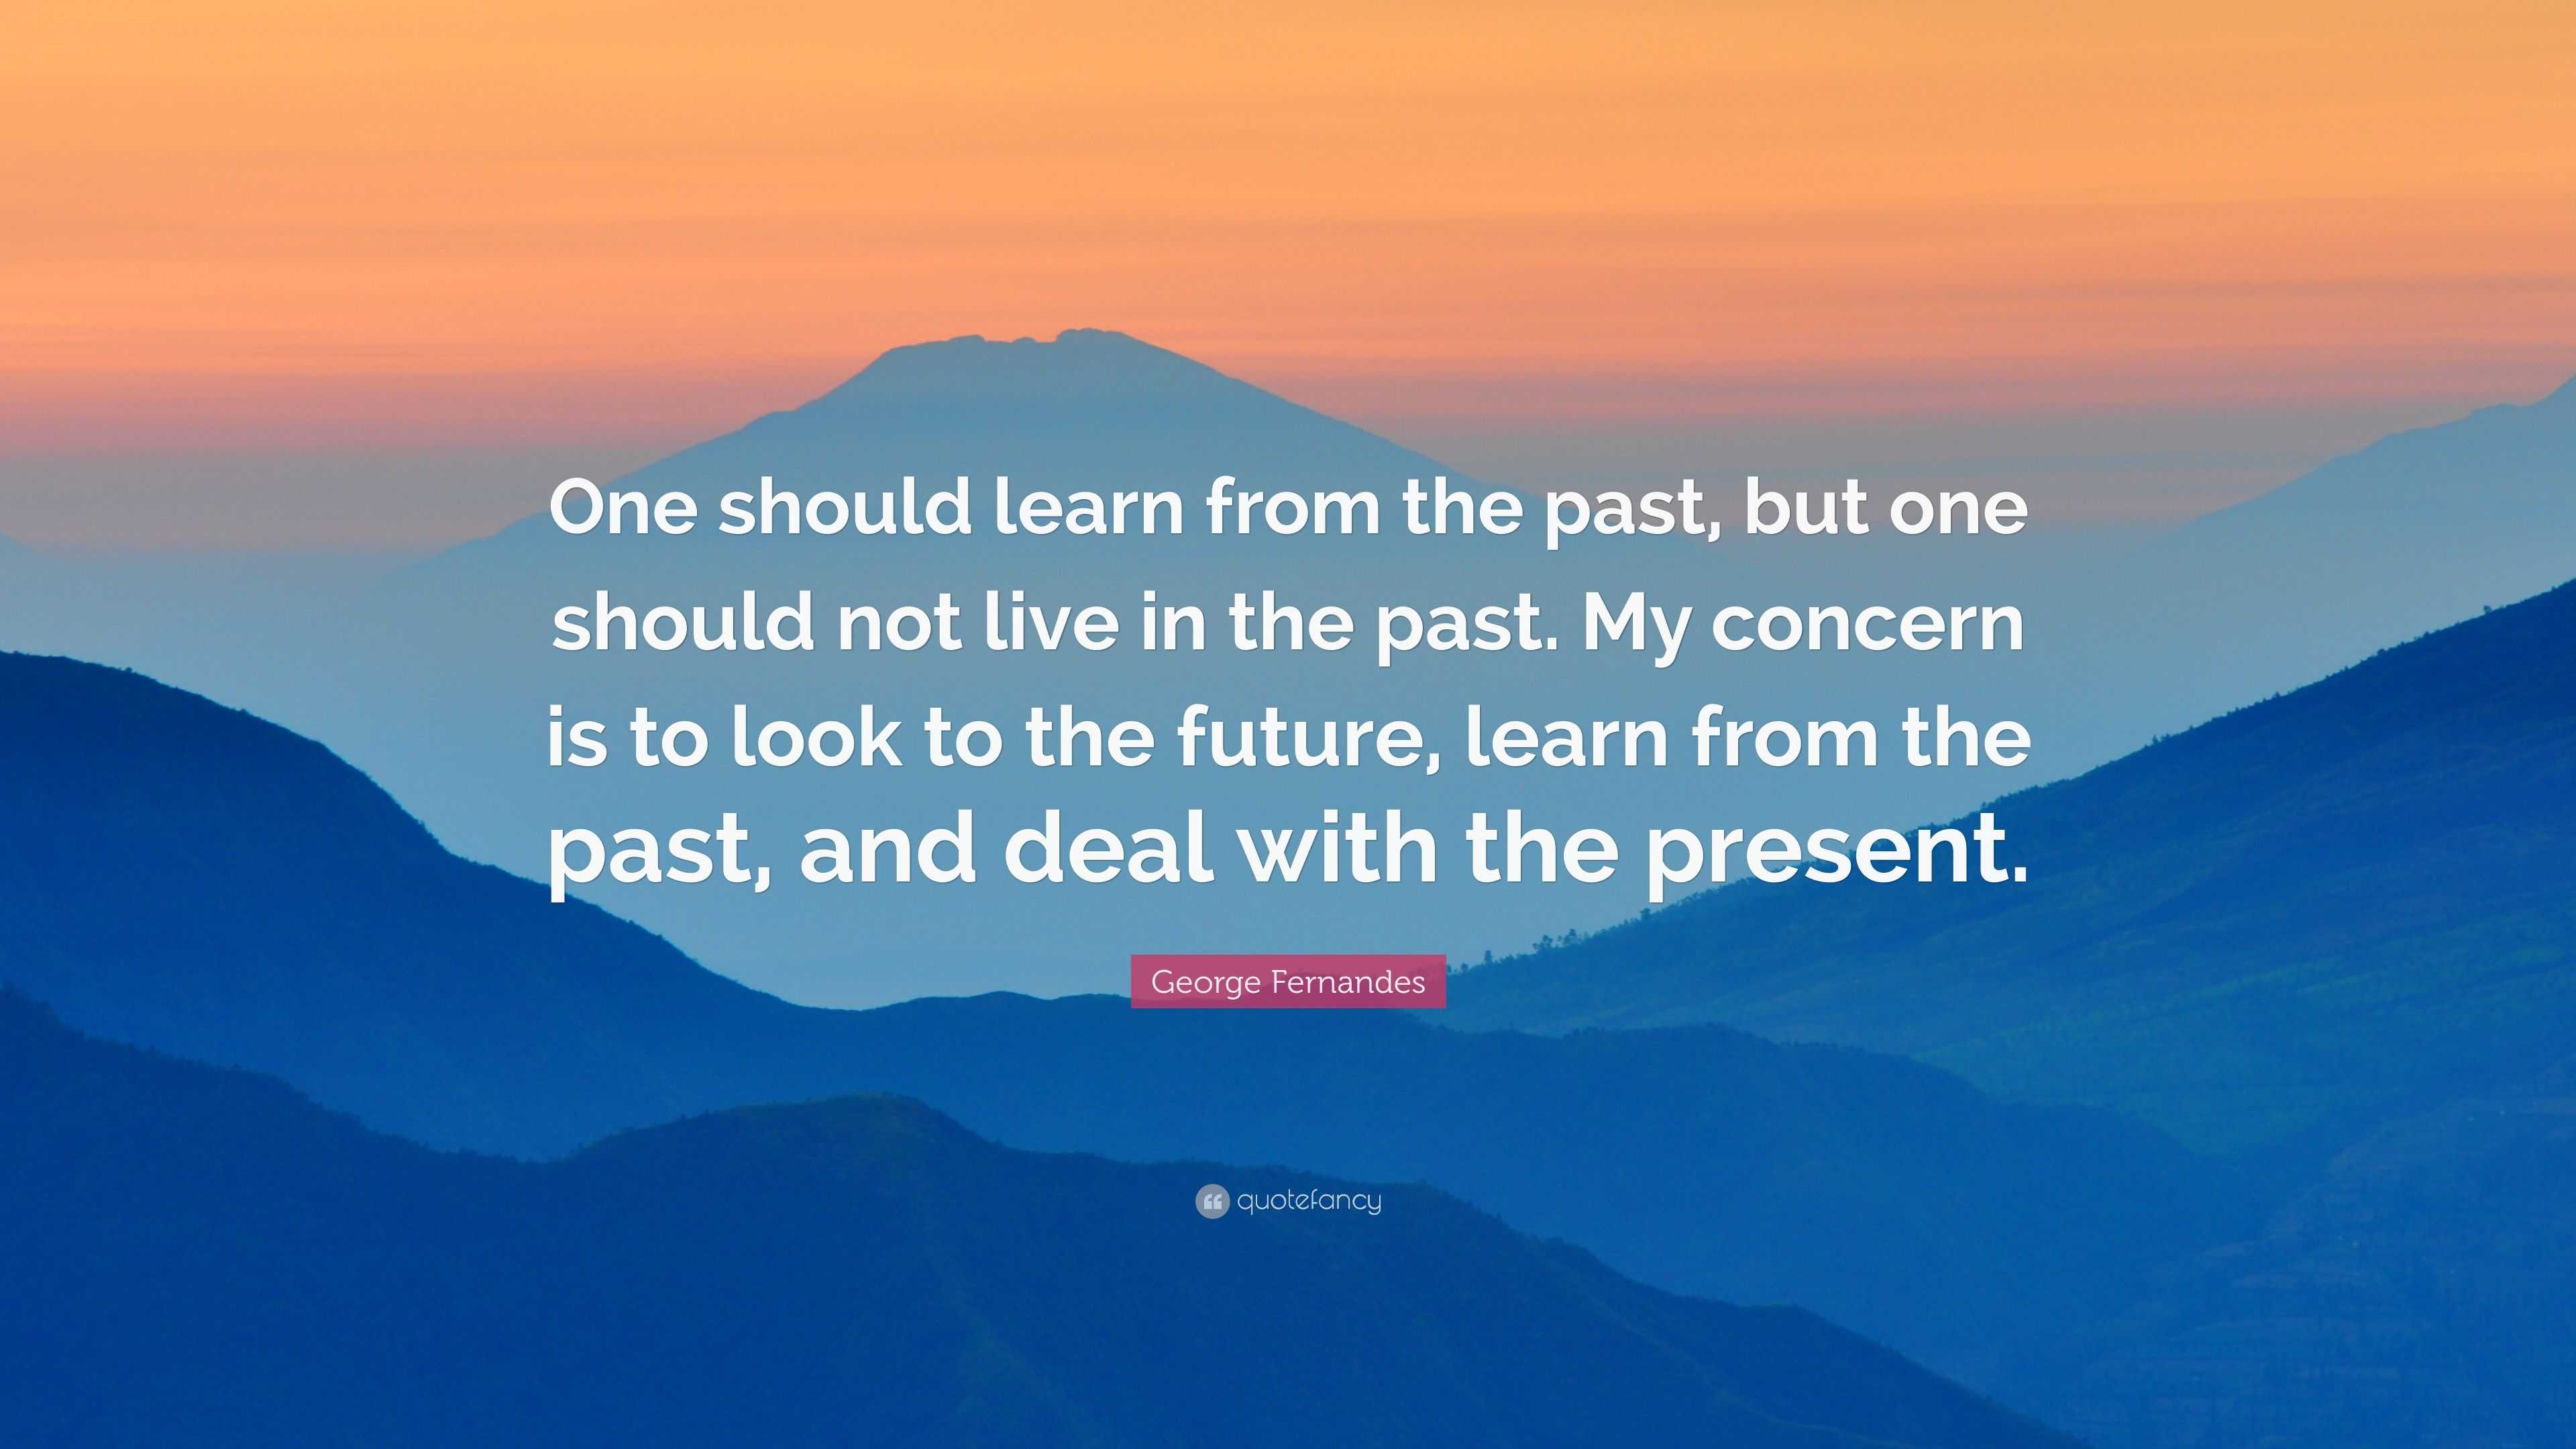 Quote: Learn from the past, look to the future, but live in the